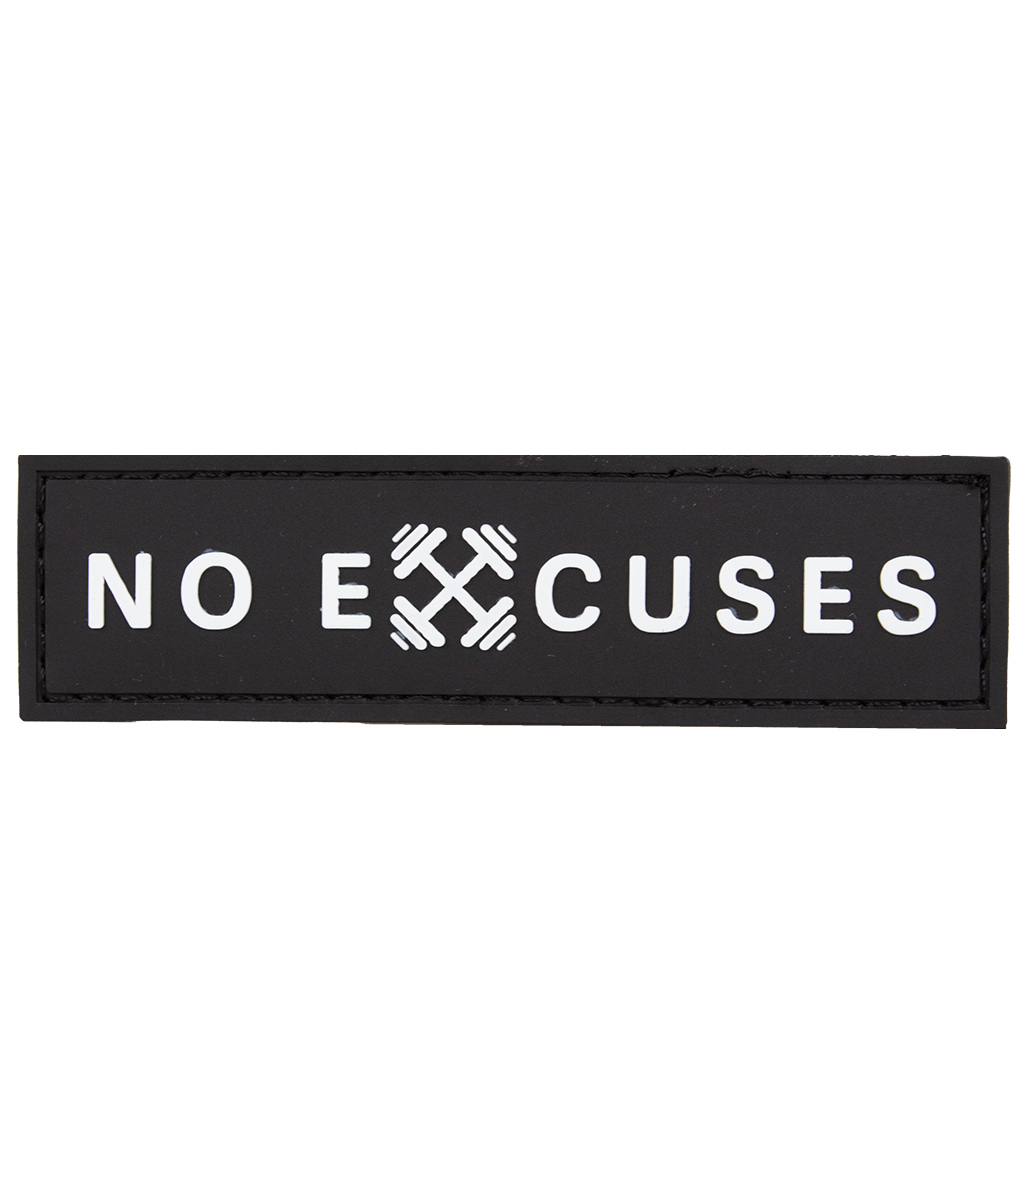 MuscleCloth No Excuses Patch 11x3 Cm